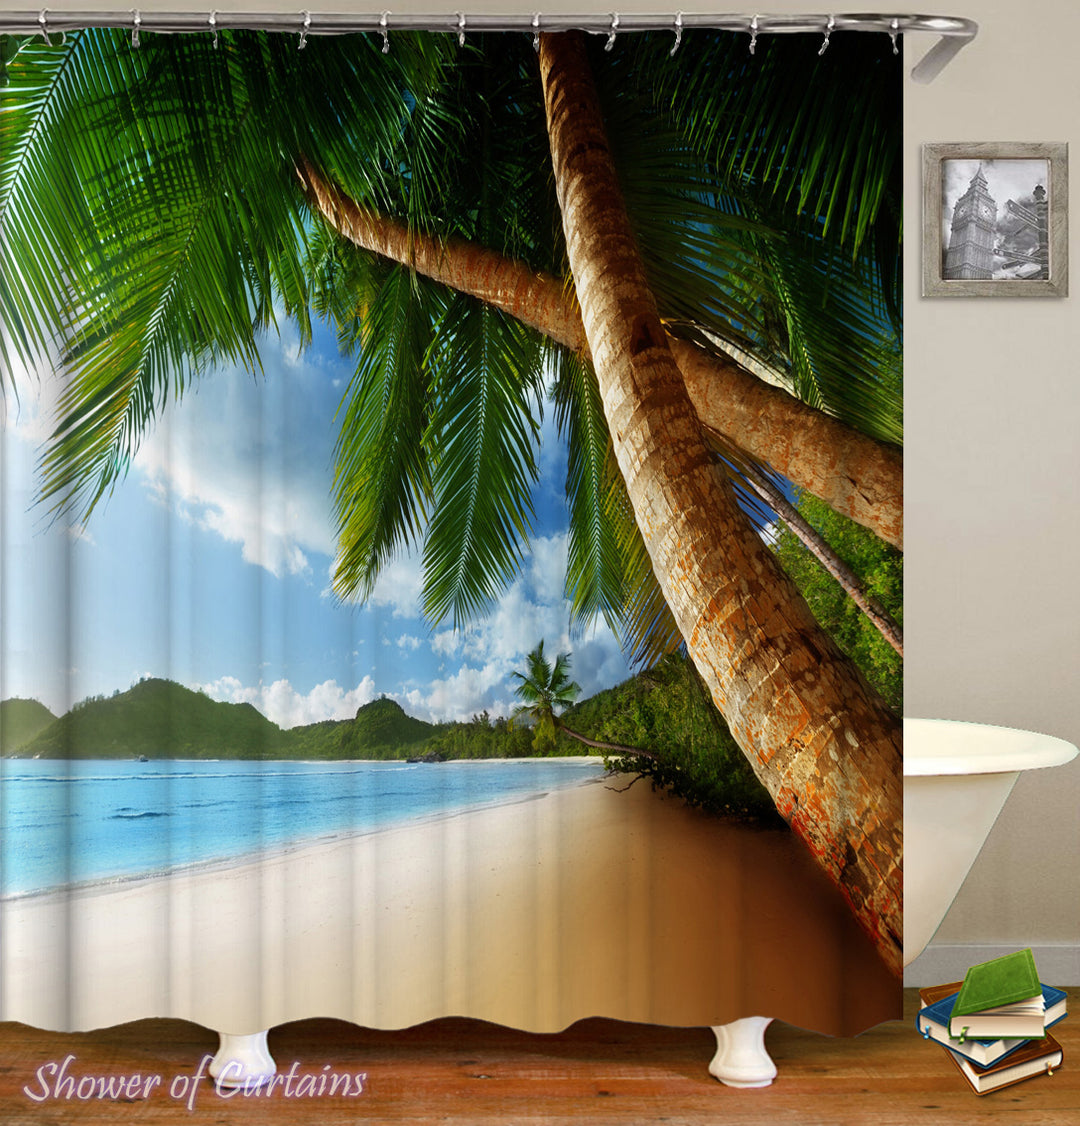 Tropical Shower Curtains of Palm Tree Shower Curtain Heaven